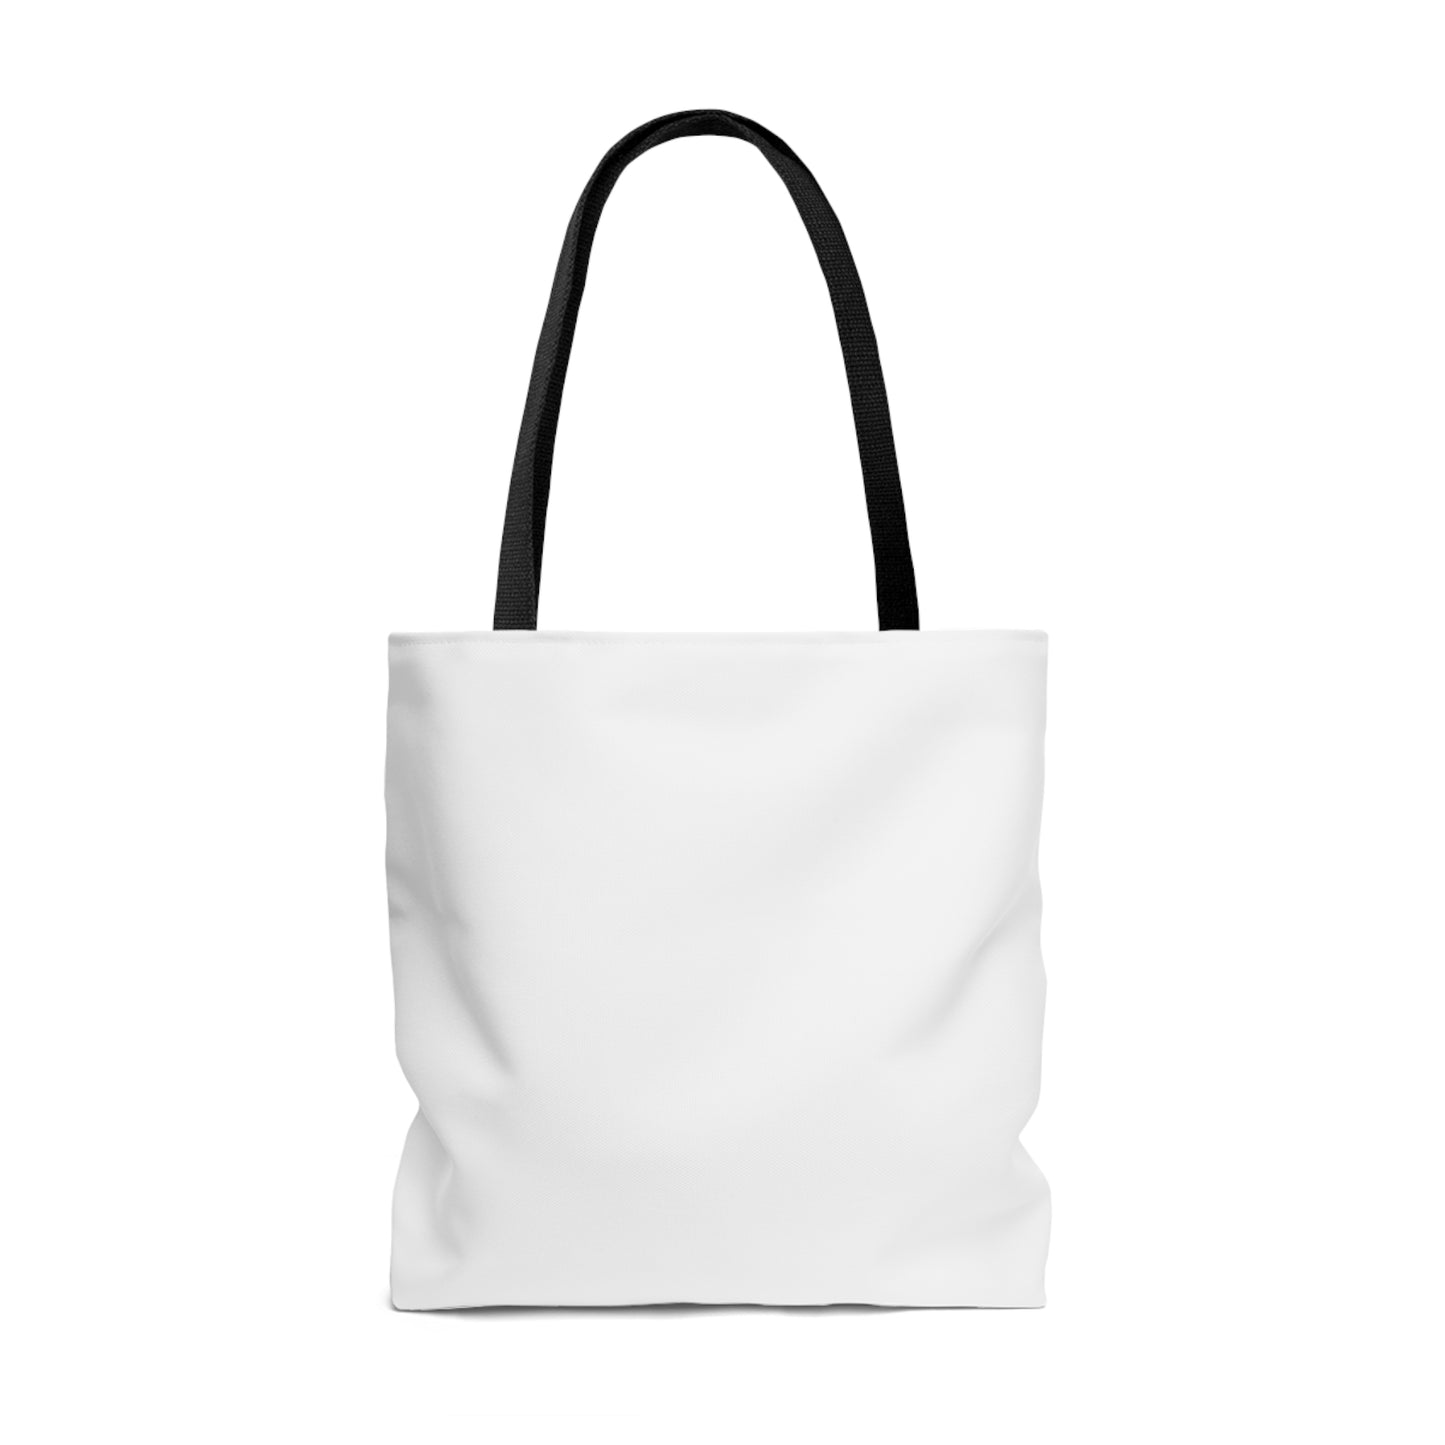 K19 Security Solutions Team One Tote Bag